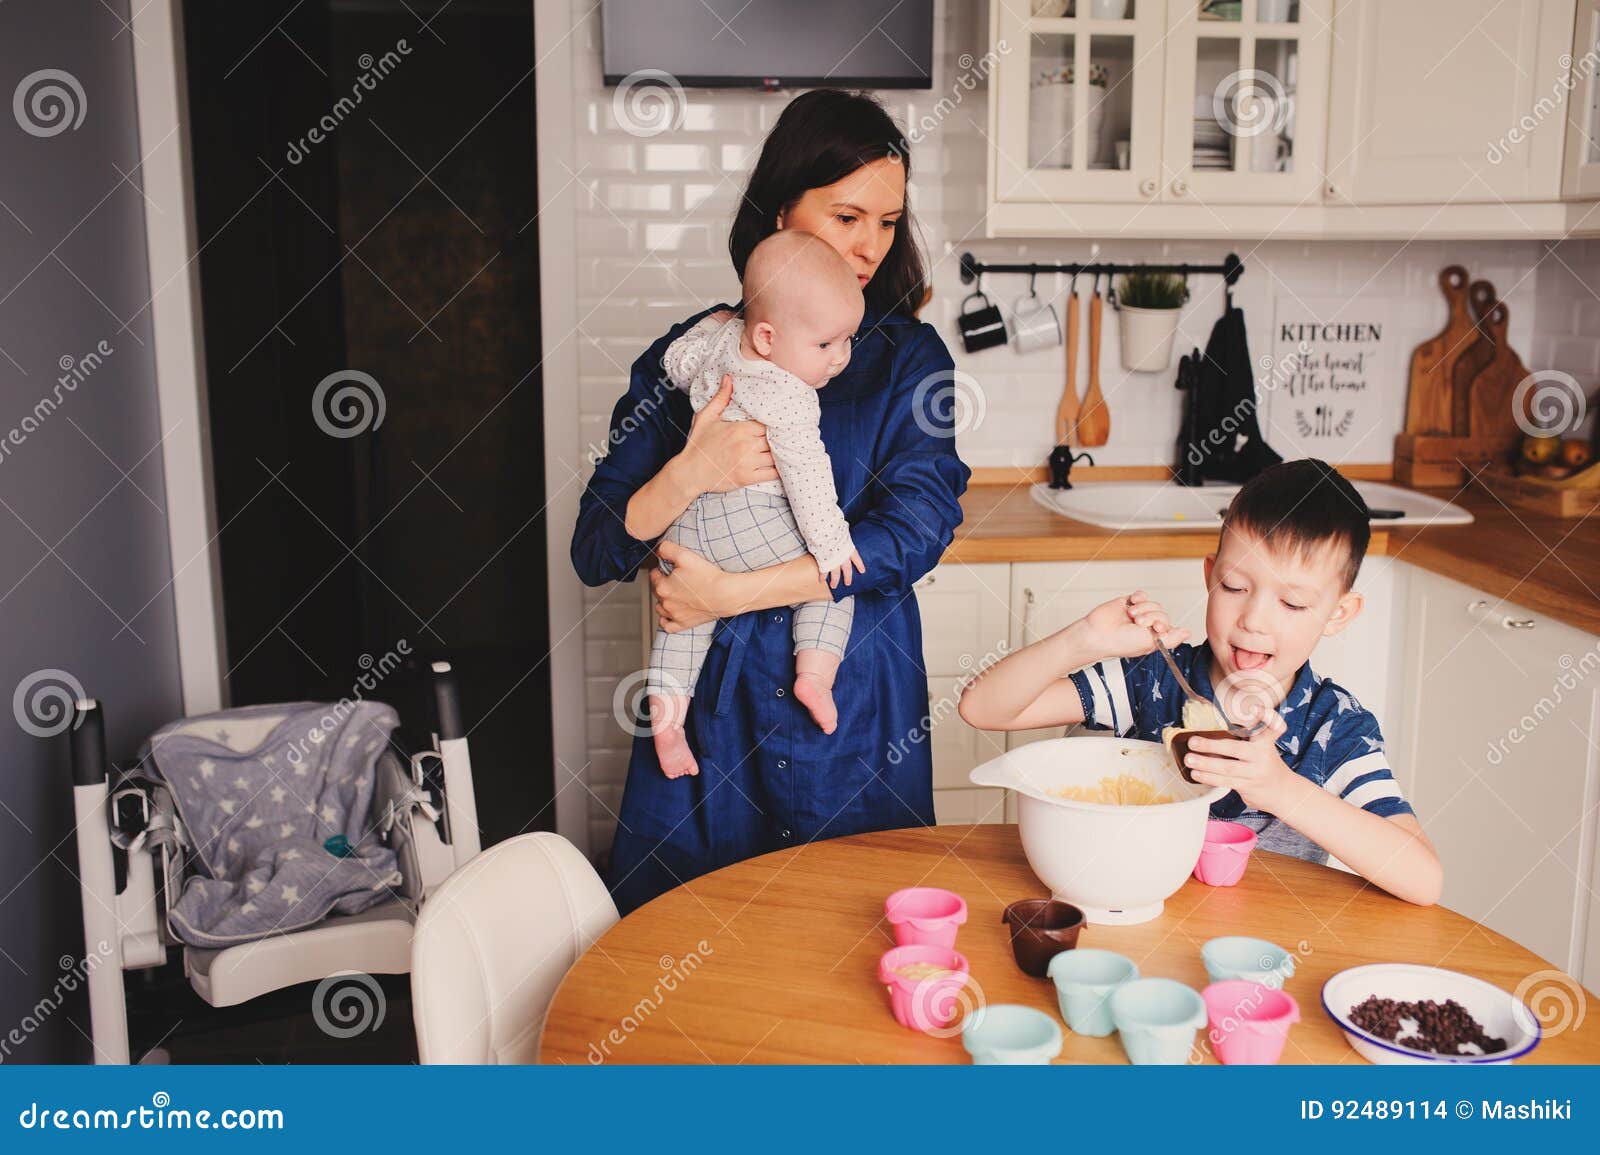 Happy Family Baking Together in Modern White Kitchen. Mother, Son and